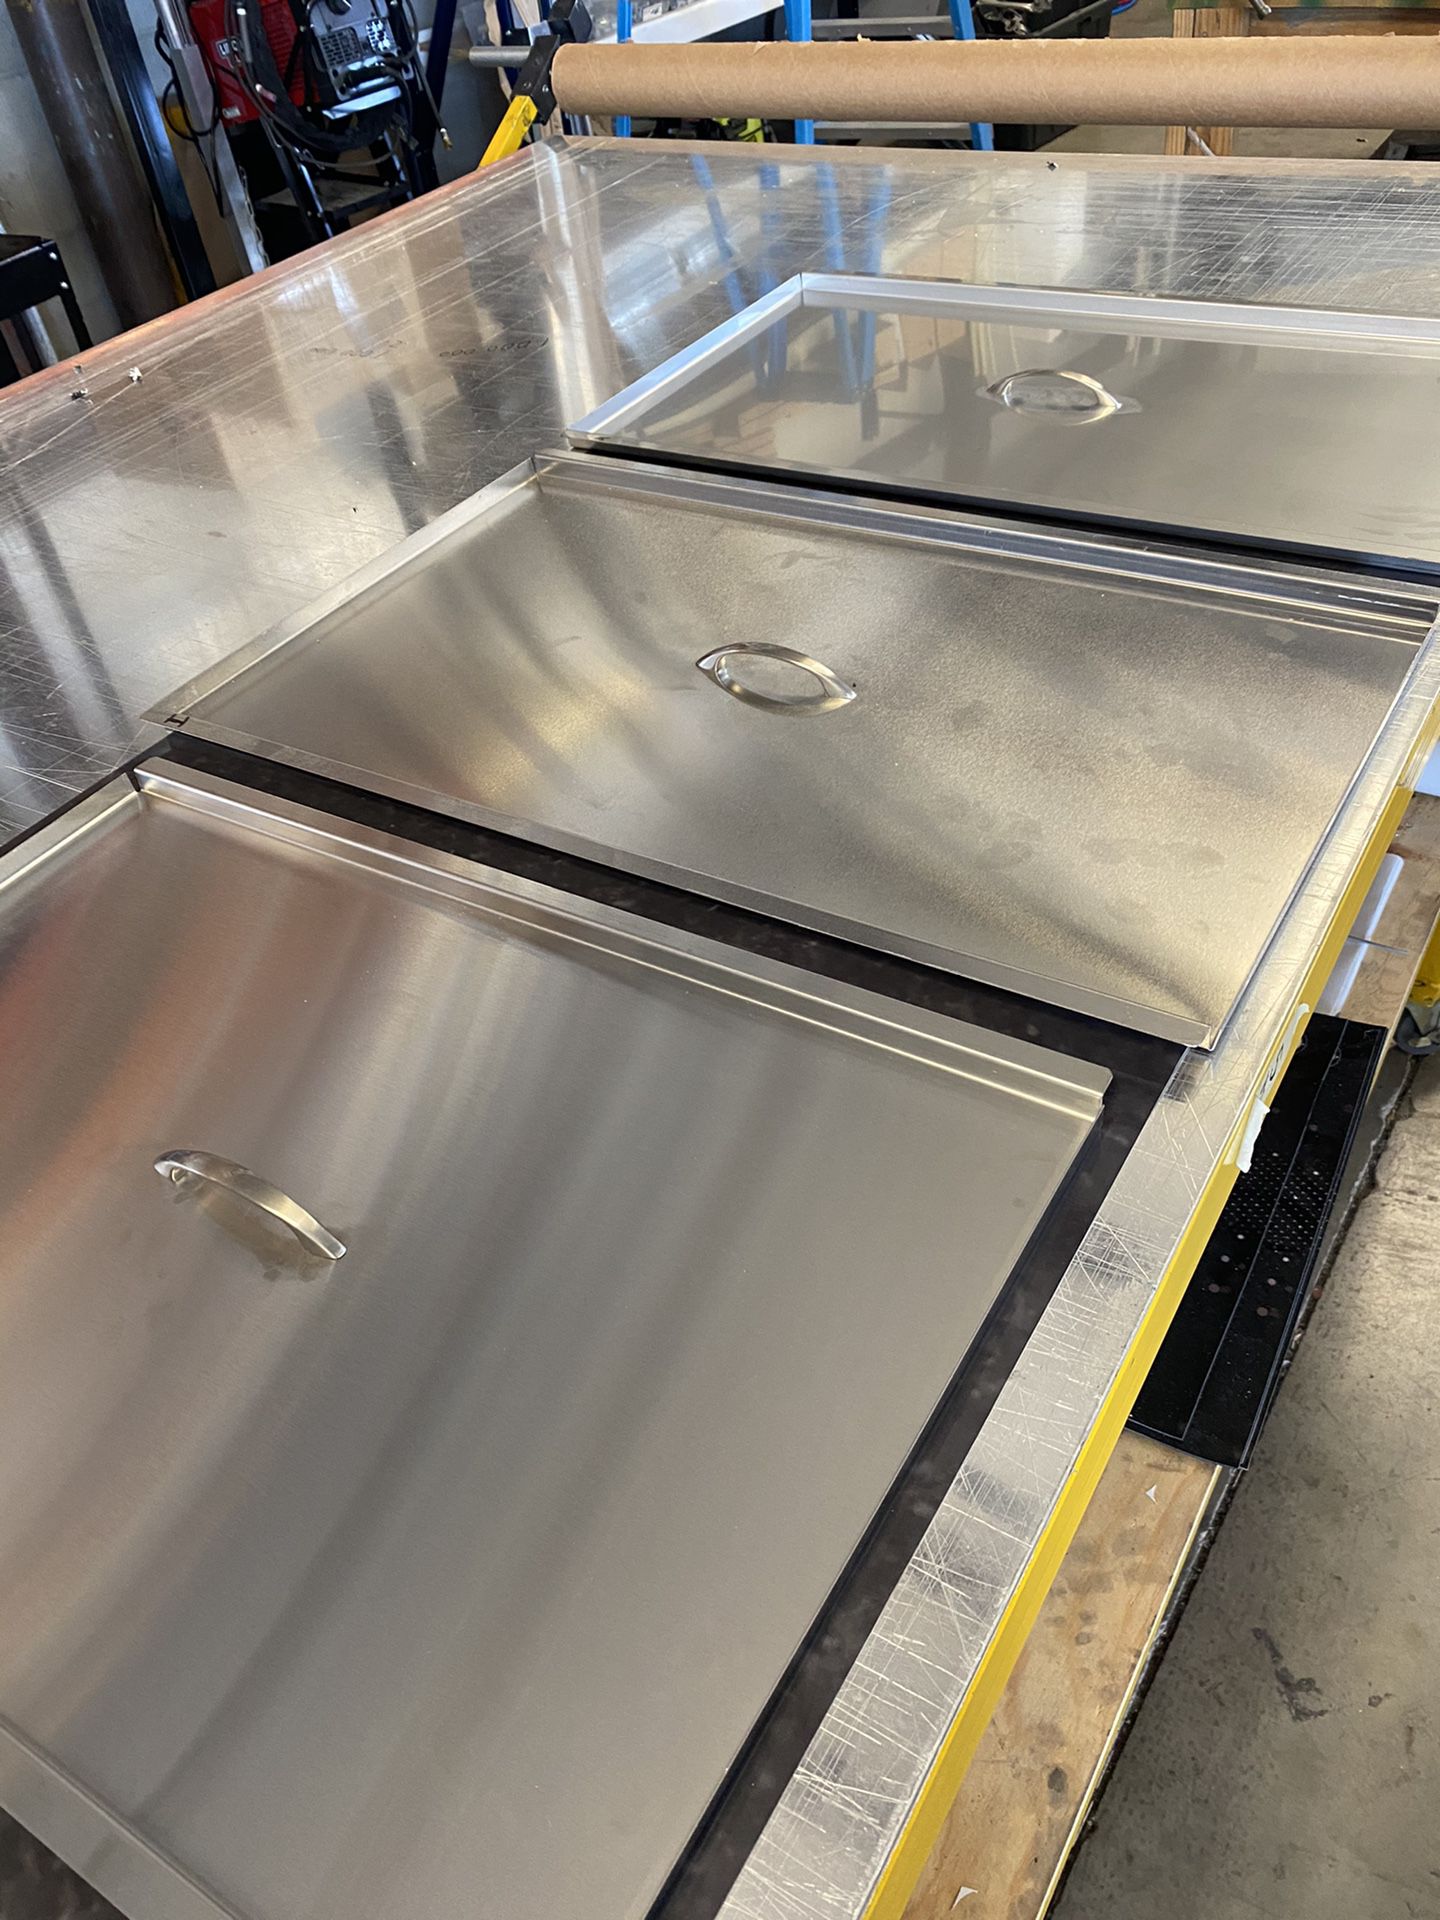 Fryer covers stainless steel